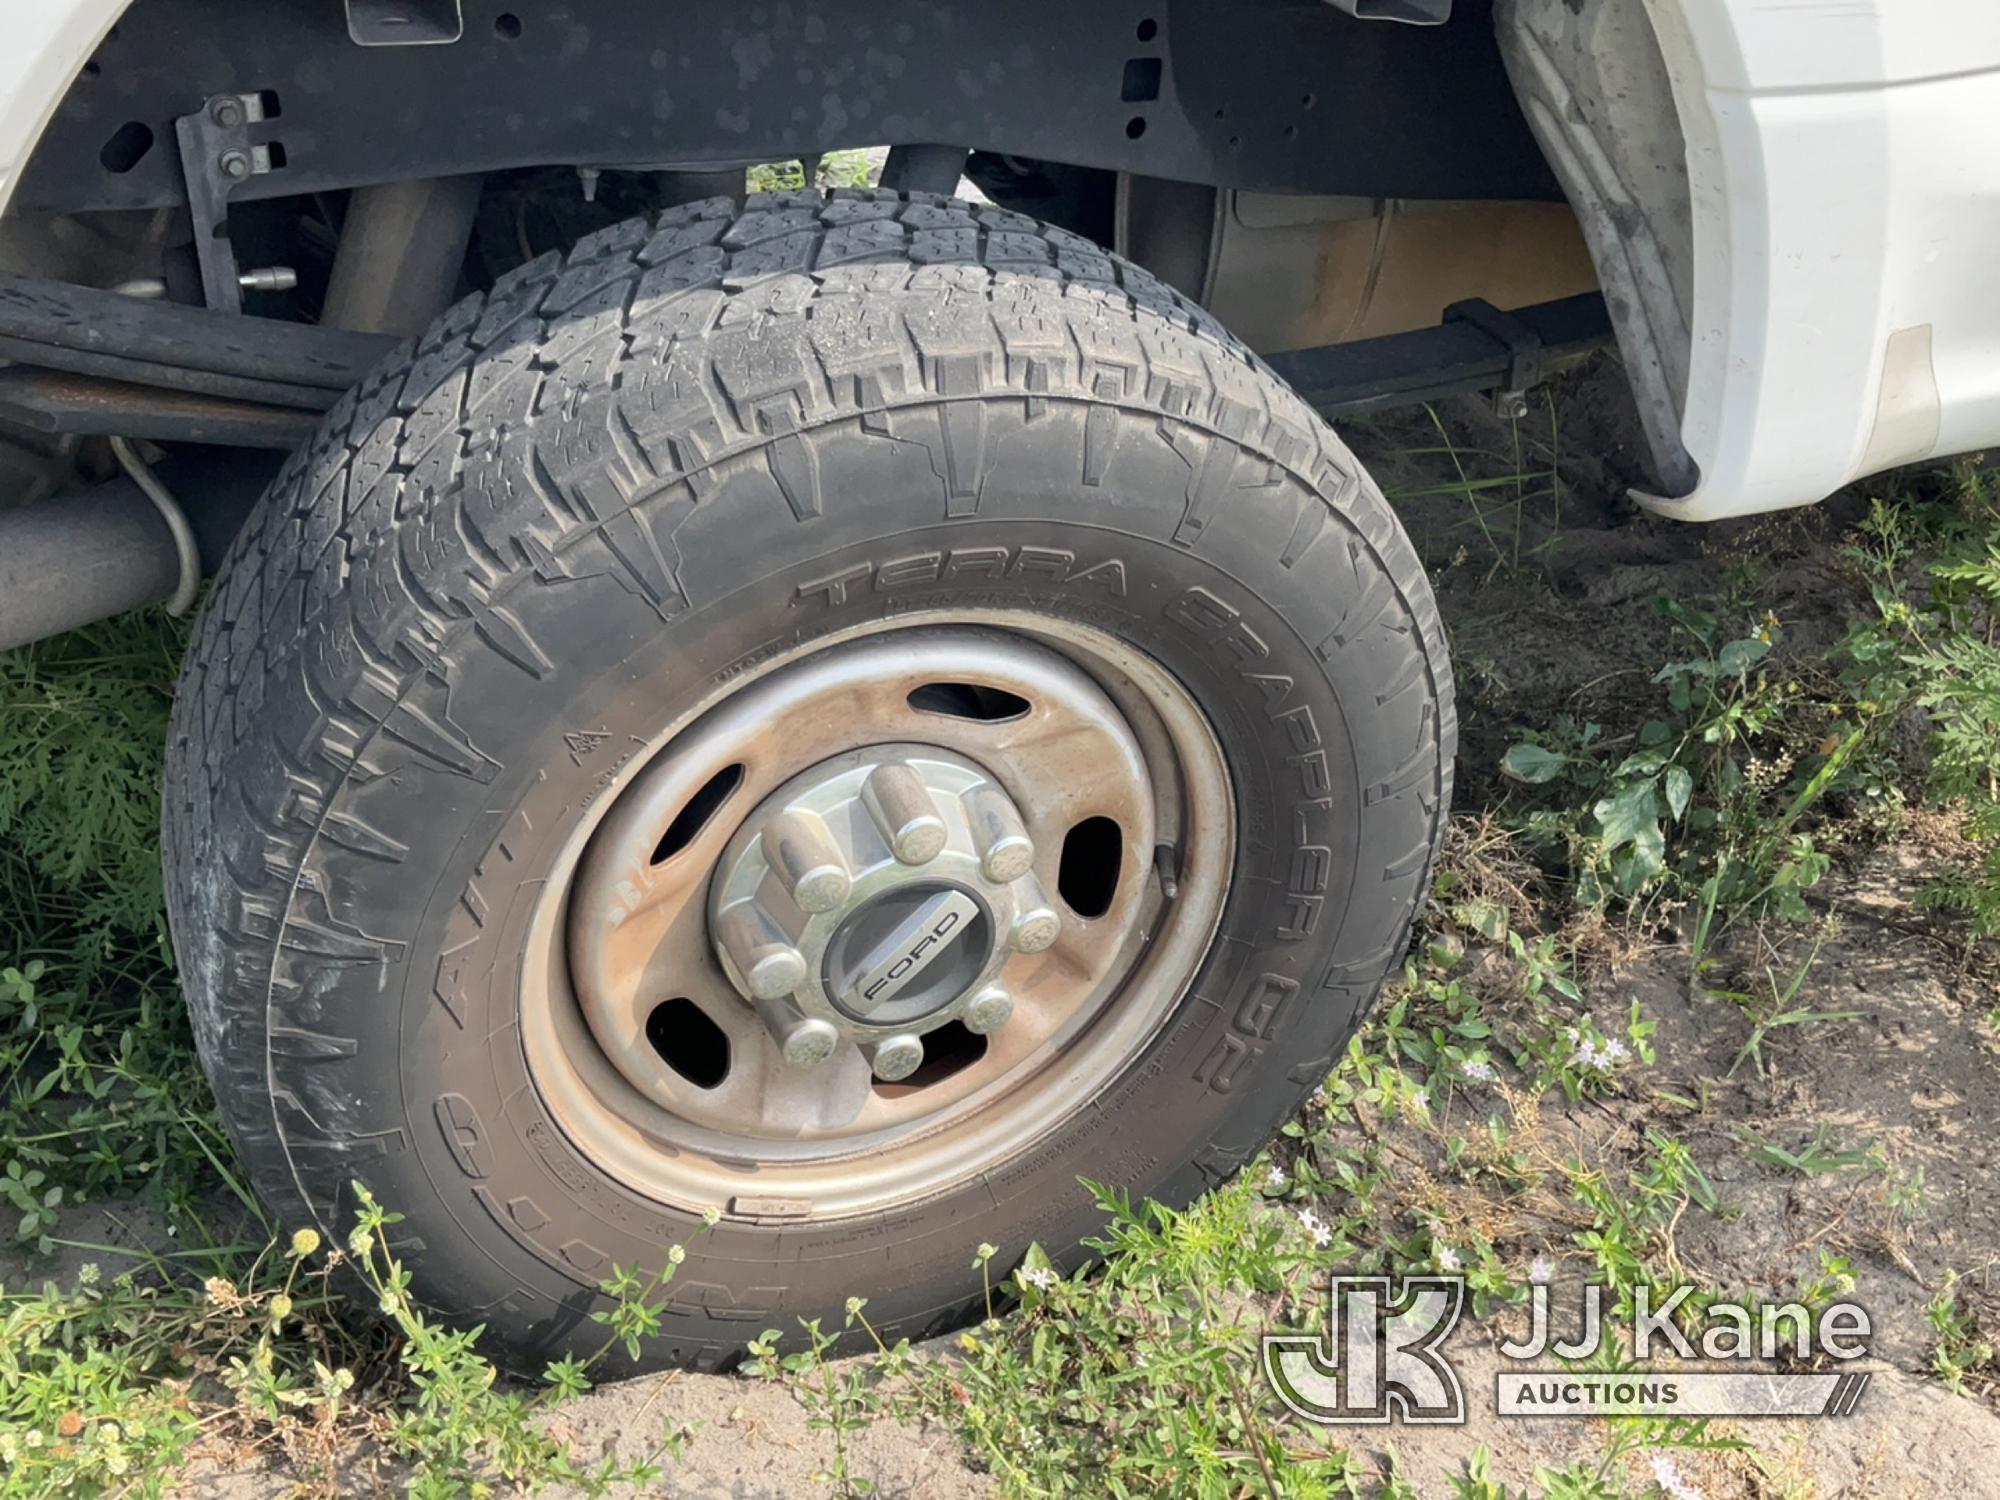 (Westlake, FL) 2017 Ford F250 4x4 Extended-Cab Pickup Truck Will Not Stay Running & Does Not Move) (